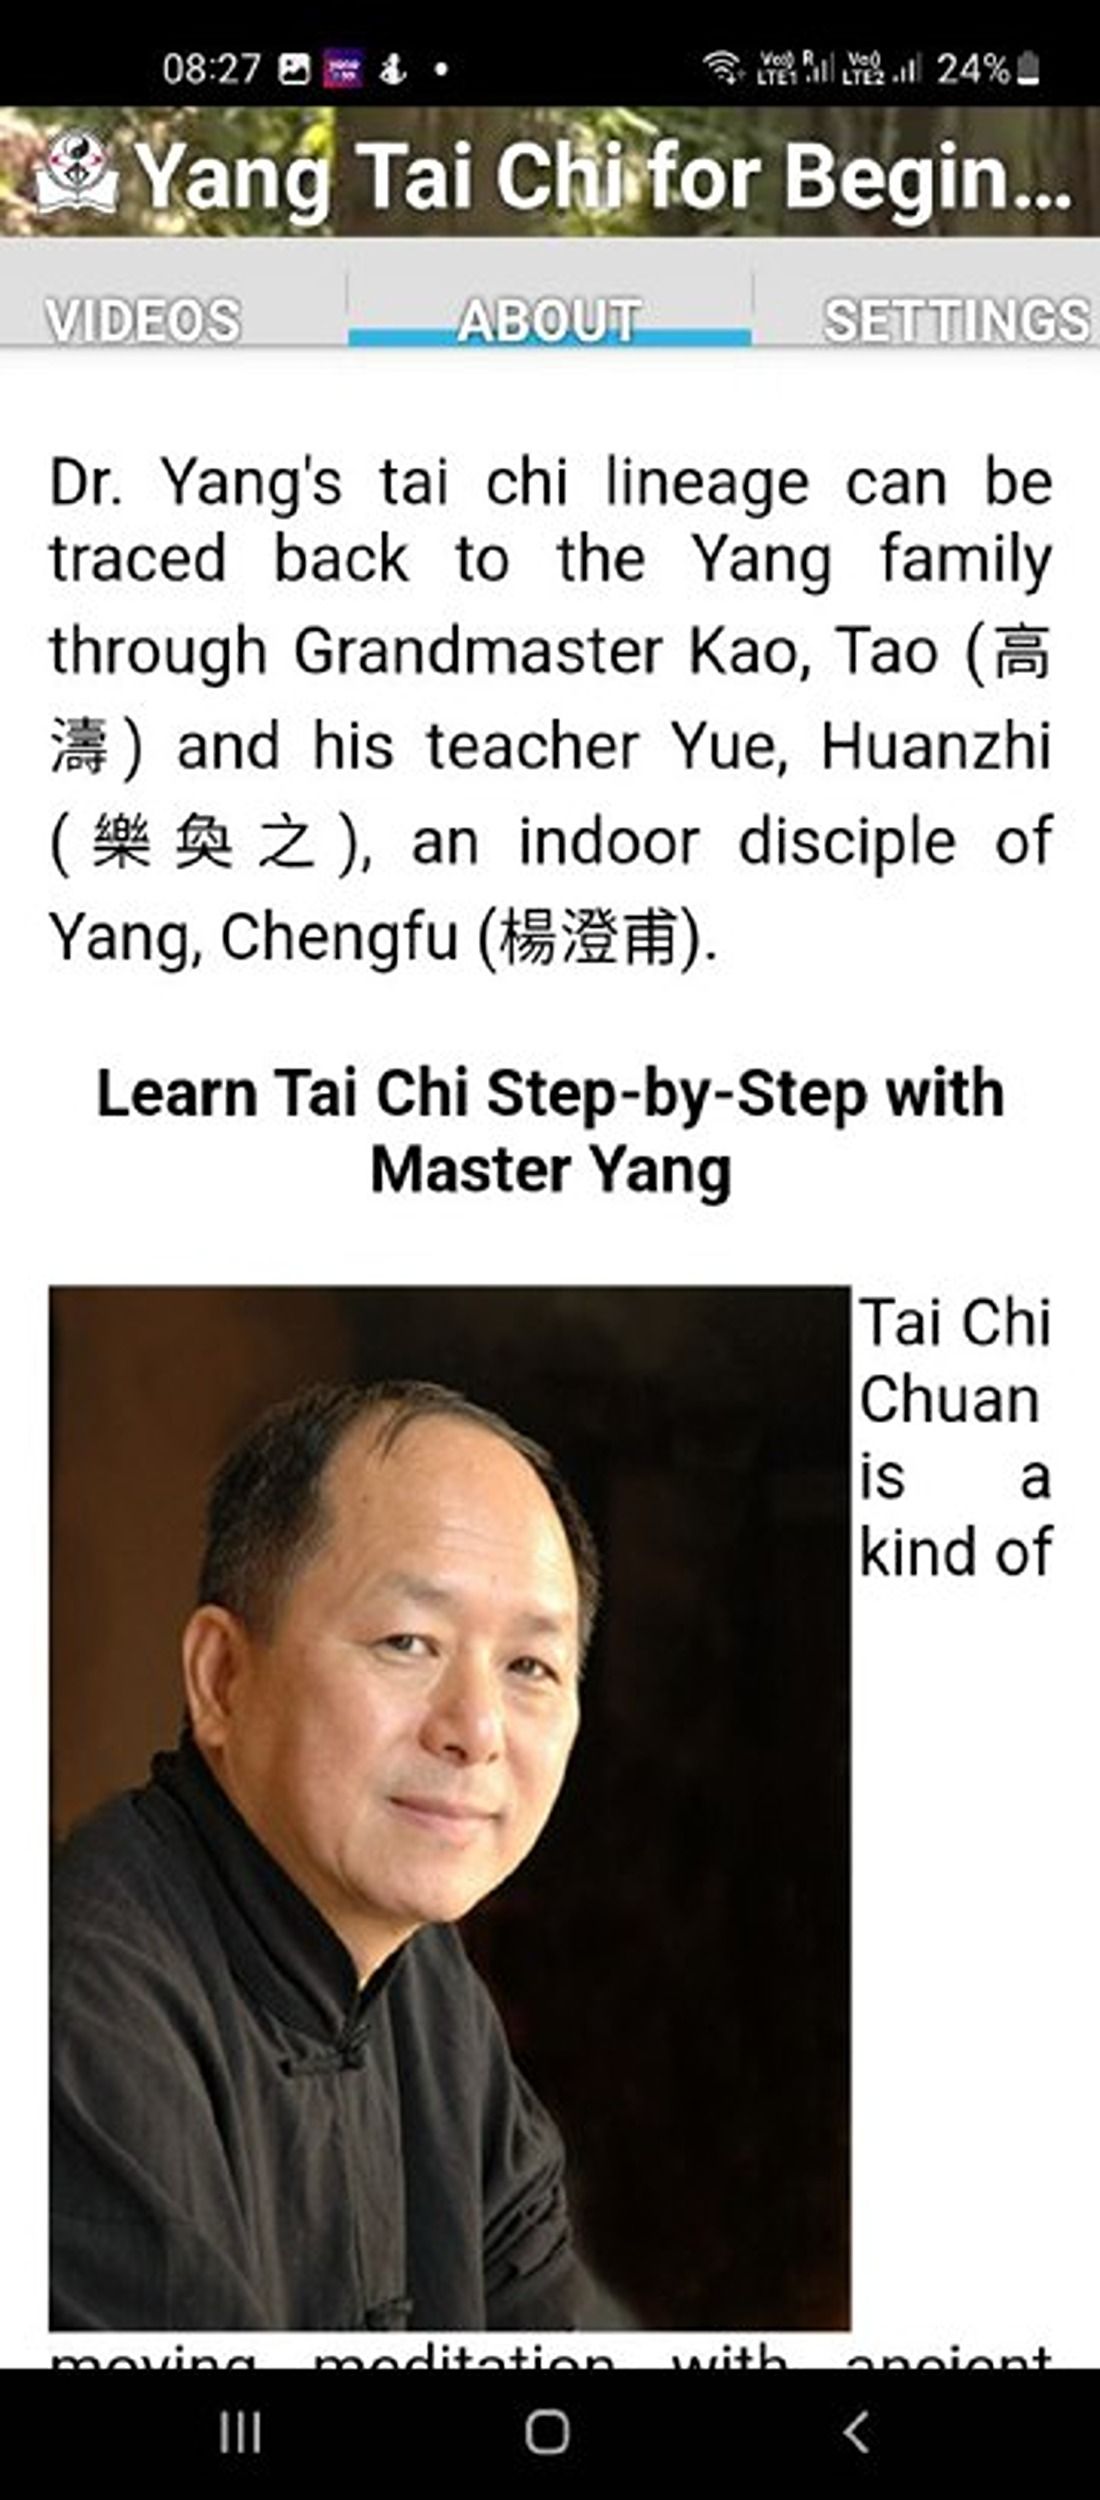 the tai chi information view